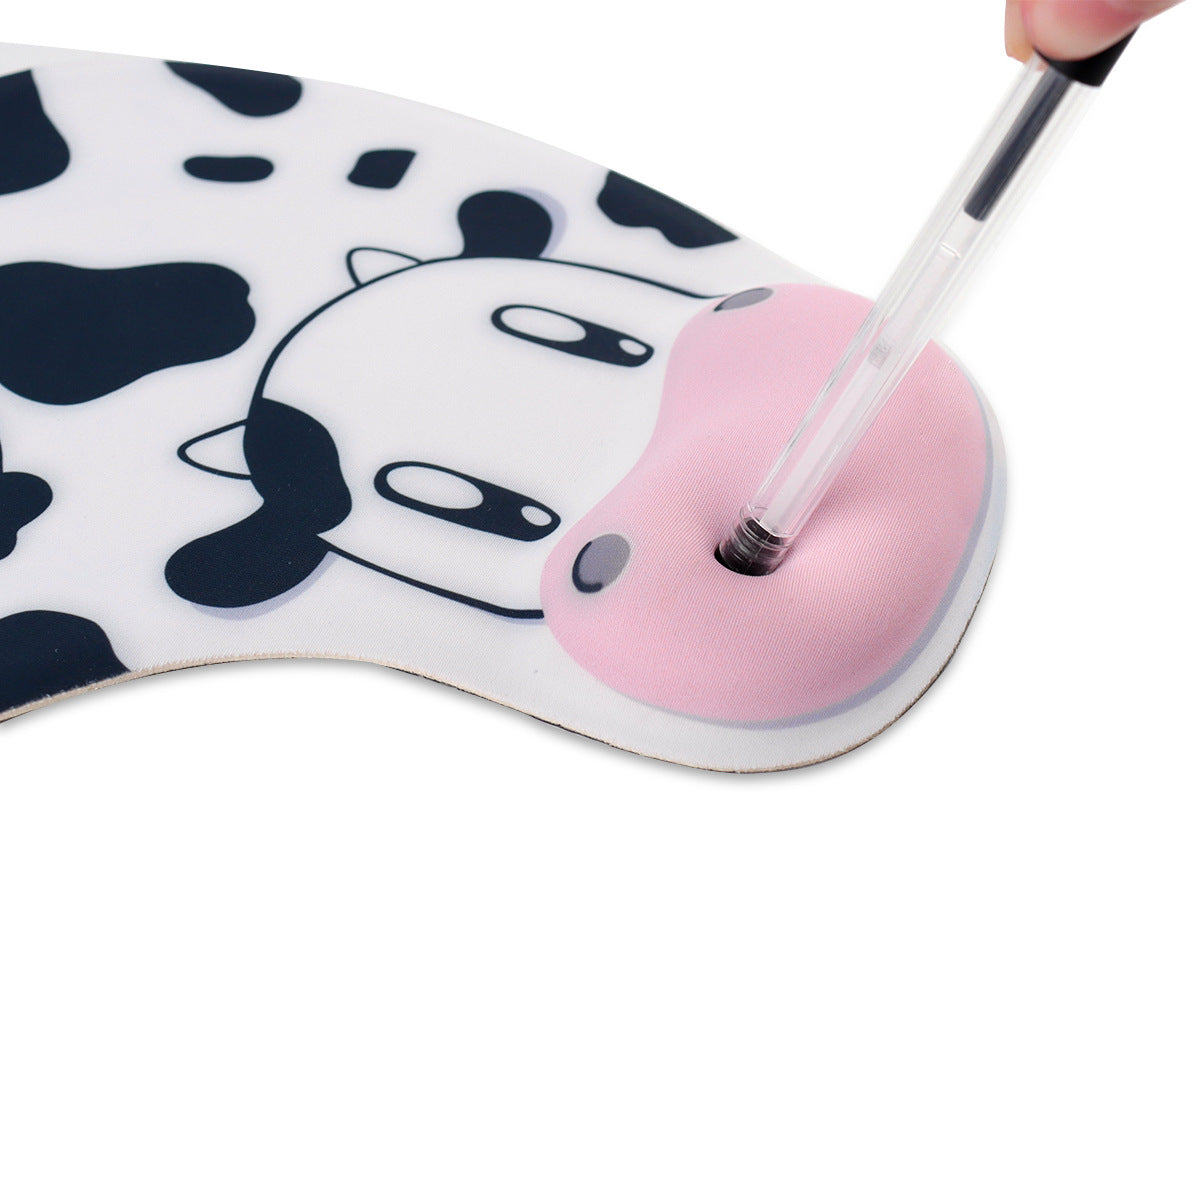 Silicone Wrist Cow Cute Mouse Pad